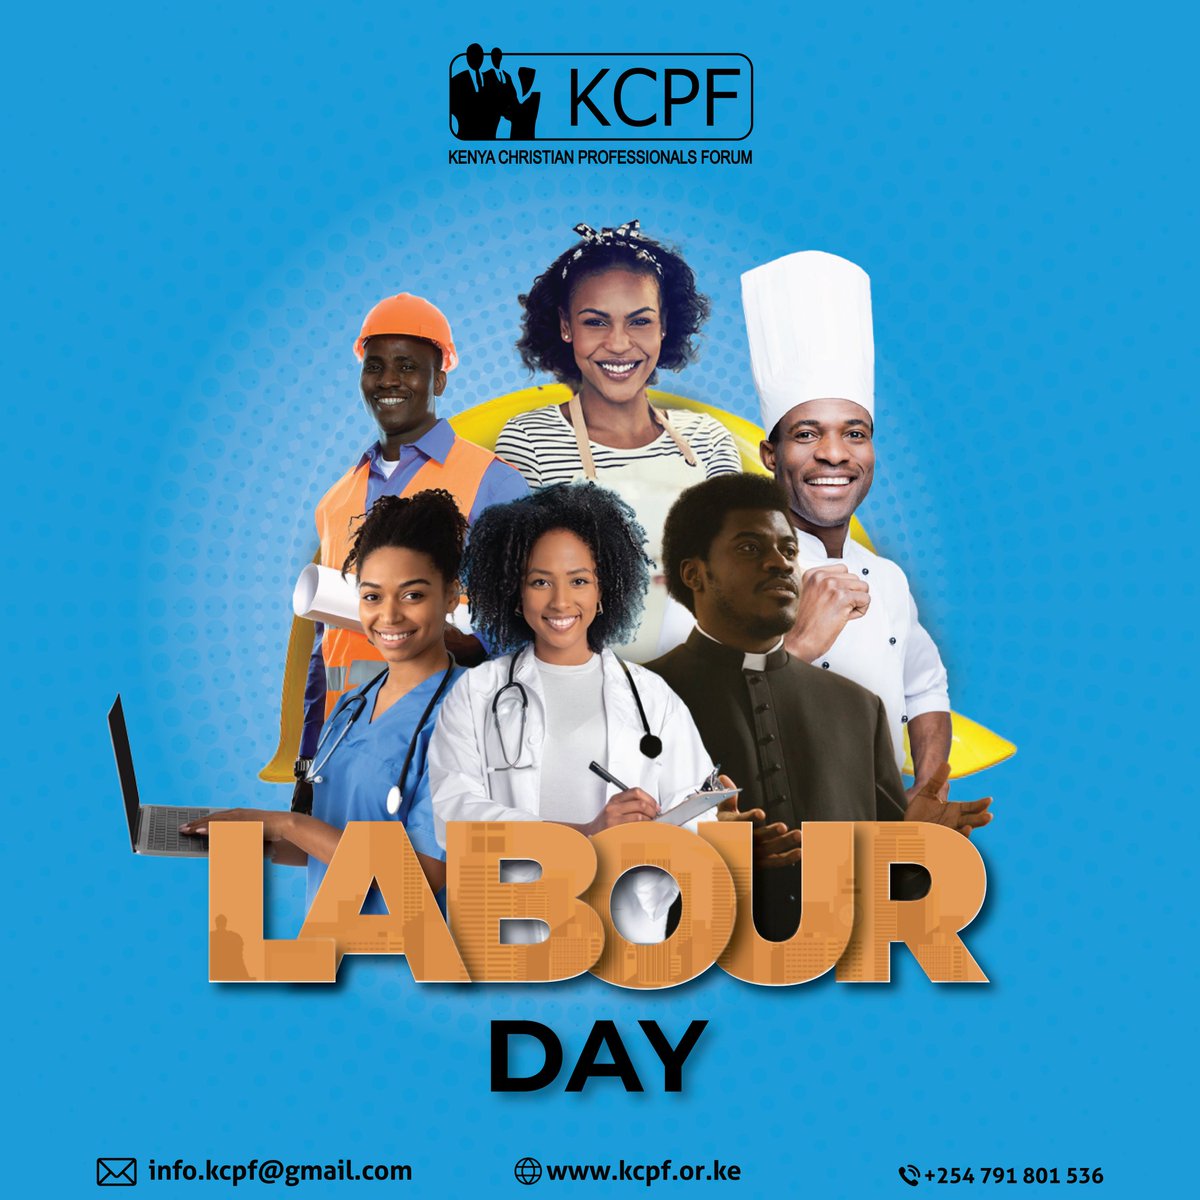 Happy Labour Day to all Kenyans! Let's celebrate the hard work and dedication of every individual contributing to the growth and prosperity of our nation. 💪🇰🇪 #LabourDay #Kenya